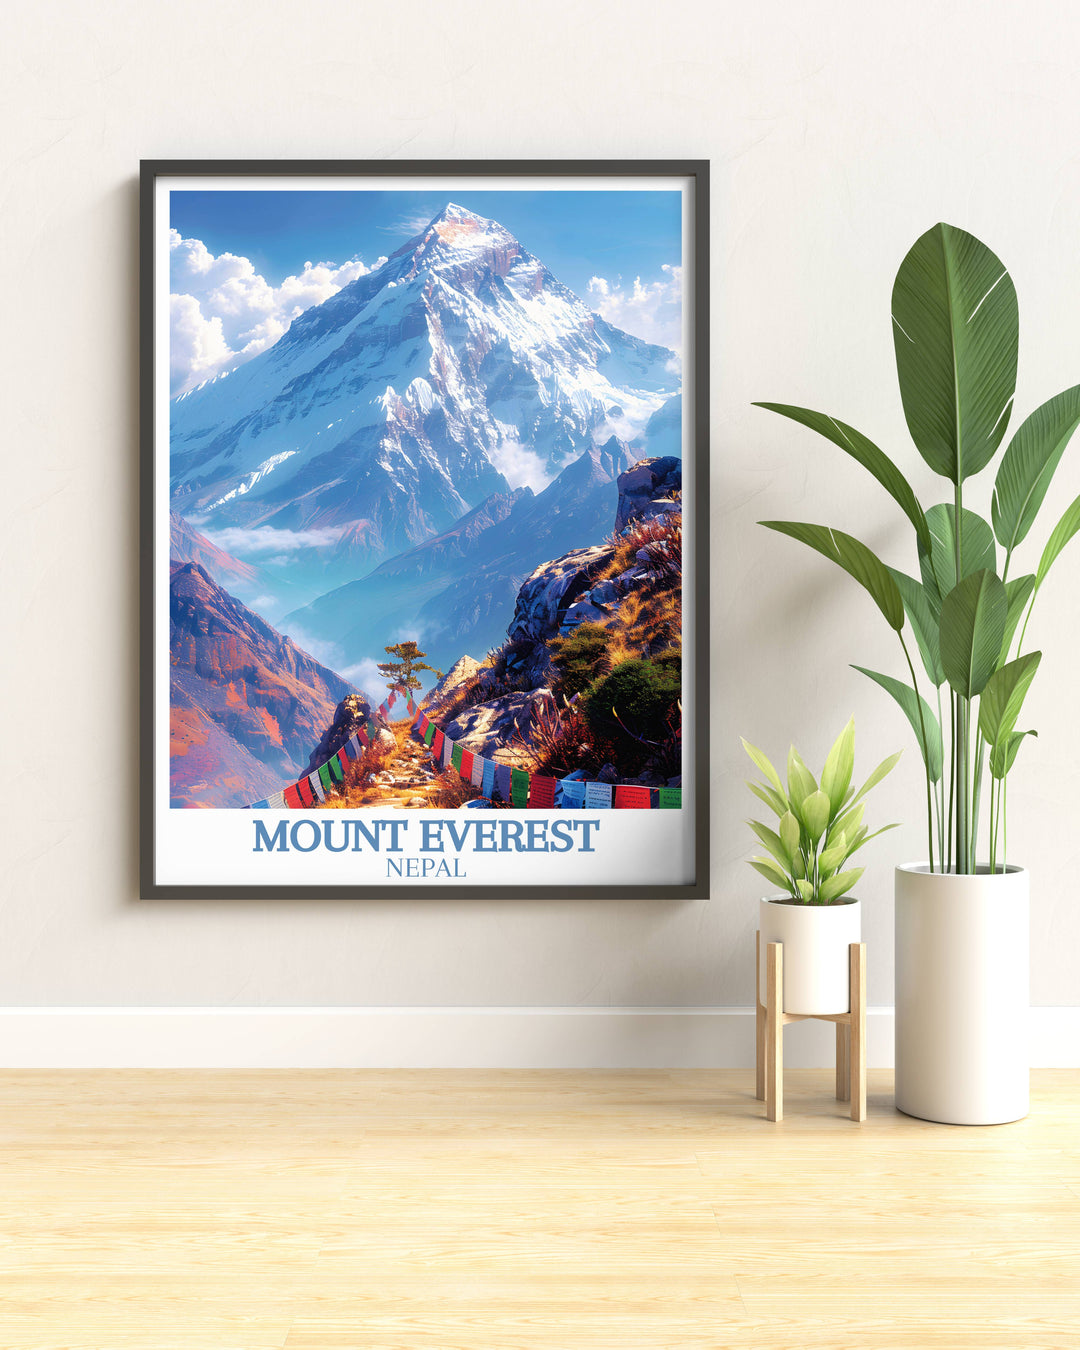 Nepal Vintage Poster featuring classic images of historic Everest expeditions, perfect for collectors and enthusiasts.